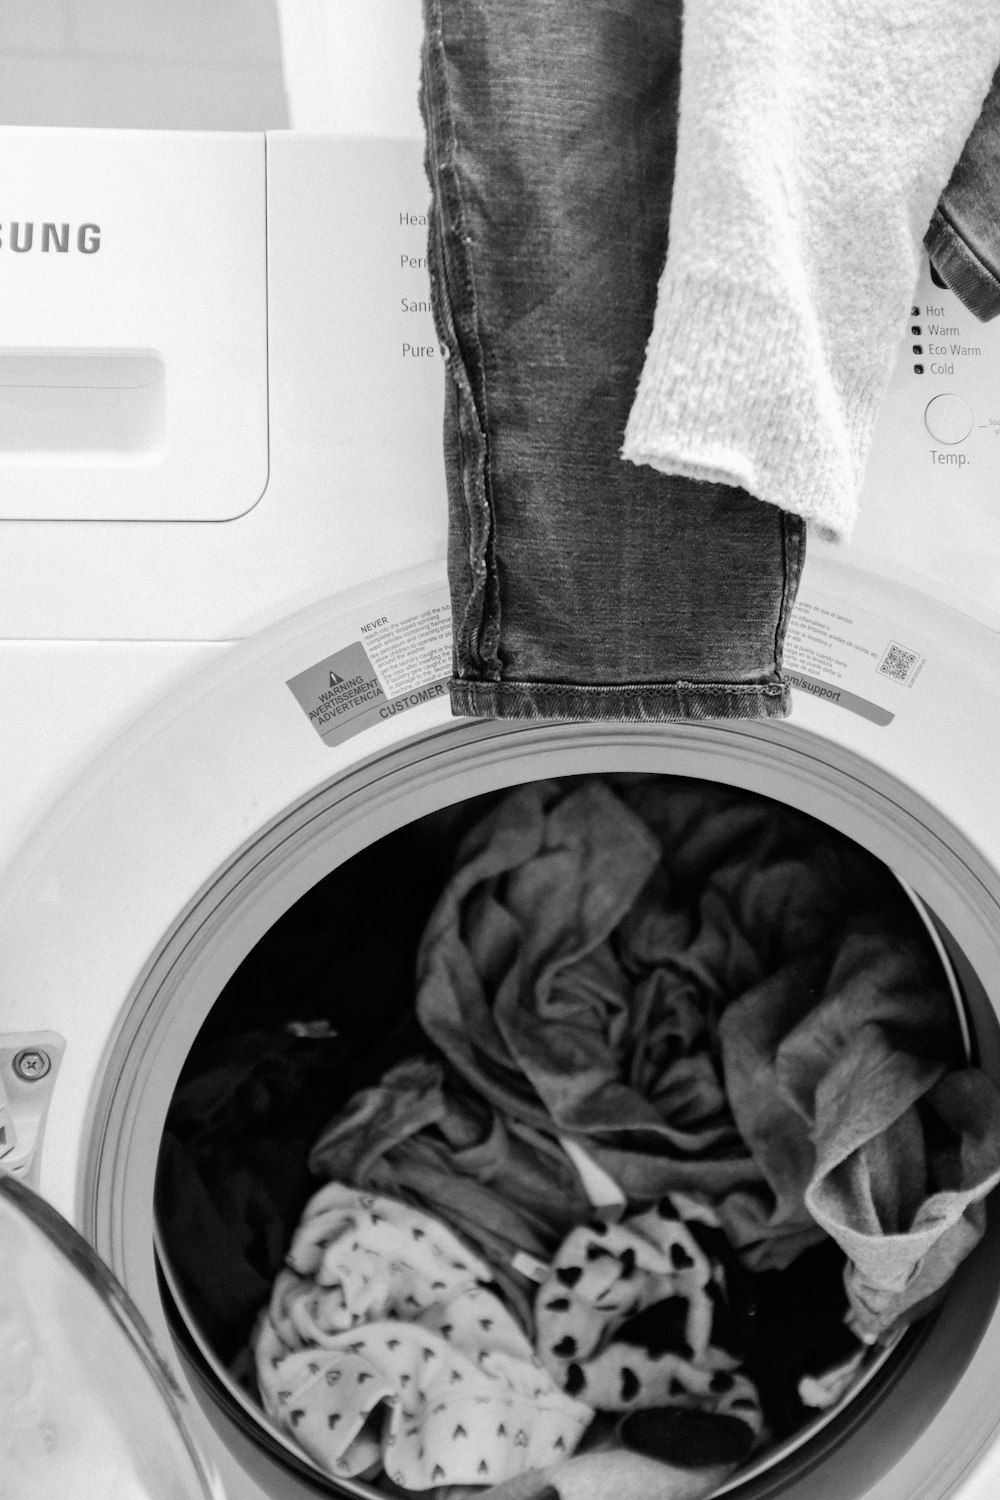 Is cold wash better for clothes?